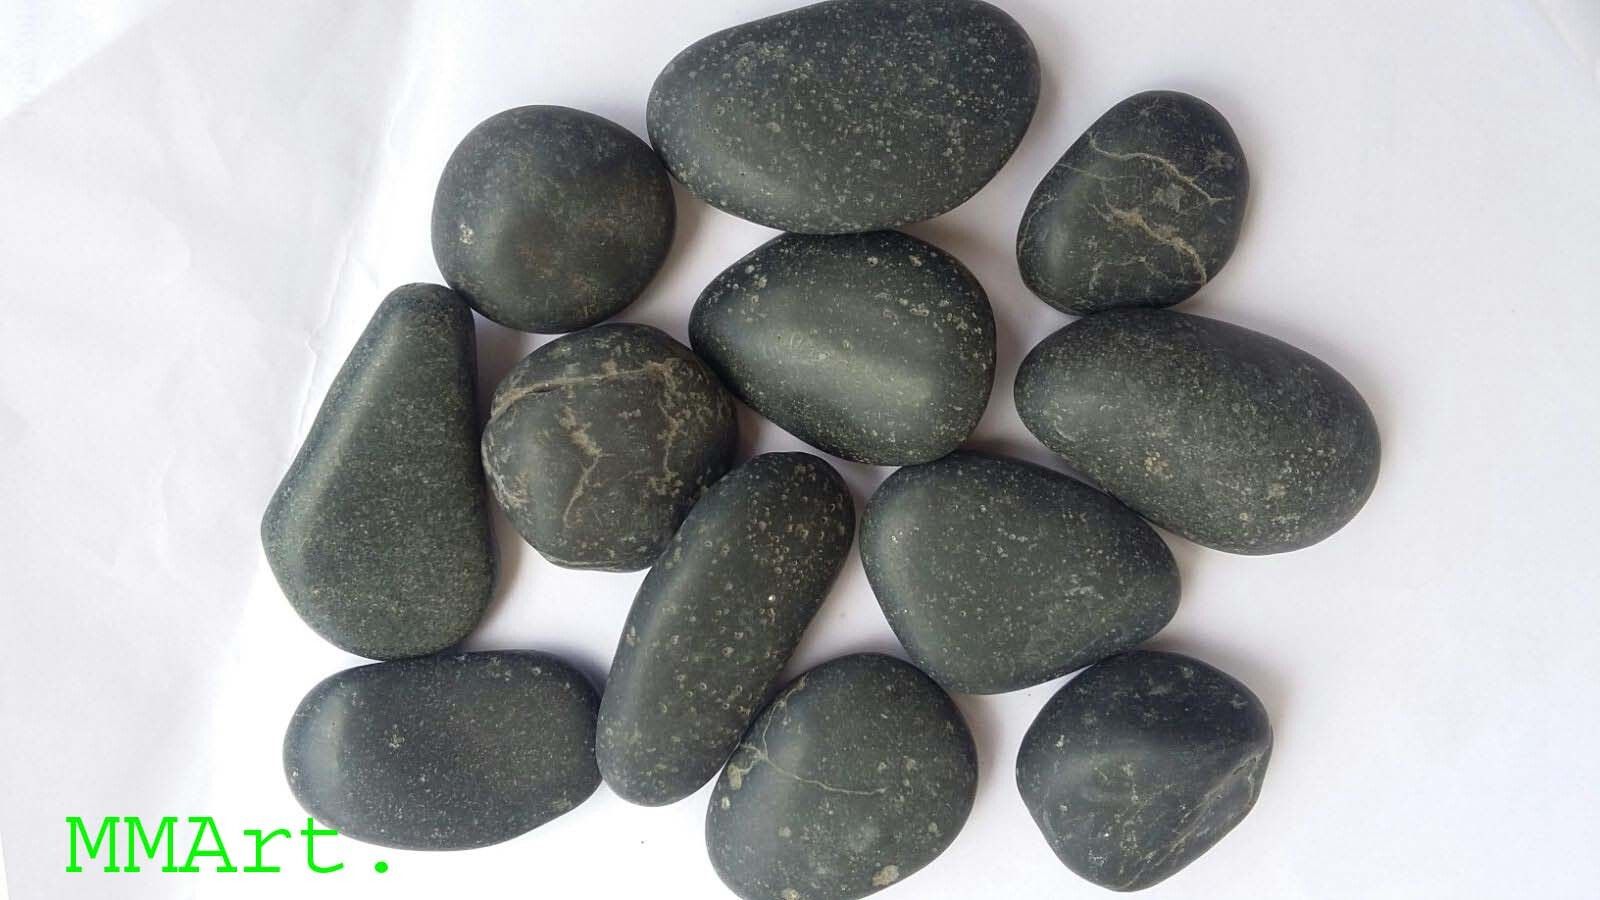 Snow white special grinding media stone with high hardness BALL MILL stone pebbles white pebbles for decoration landscapin pebbles